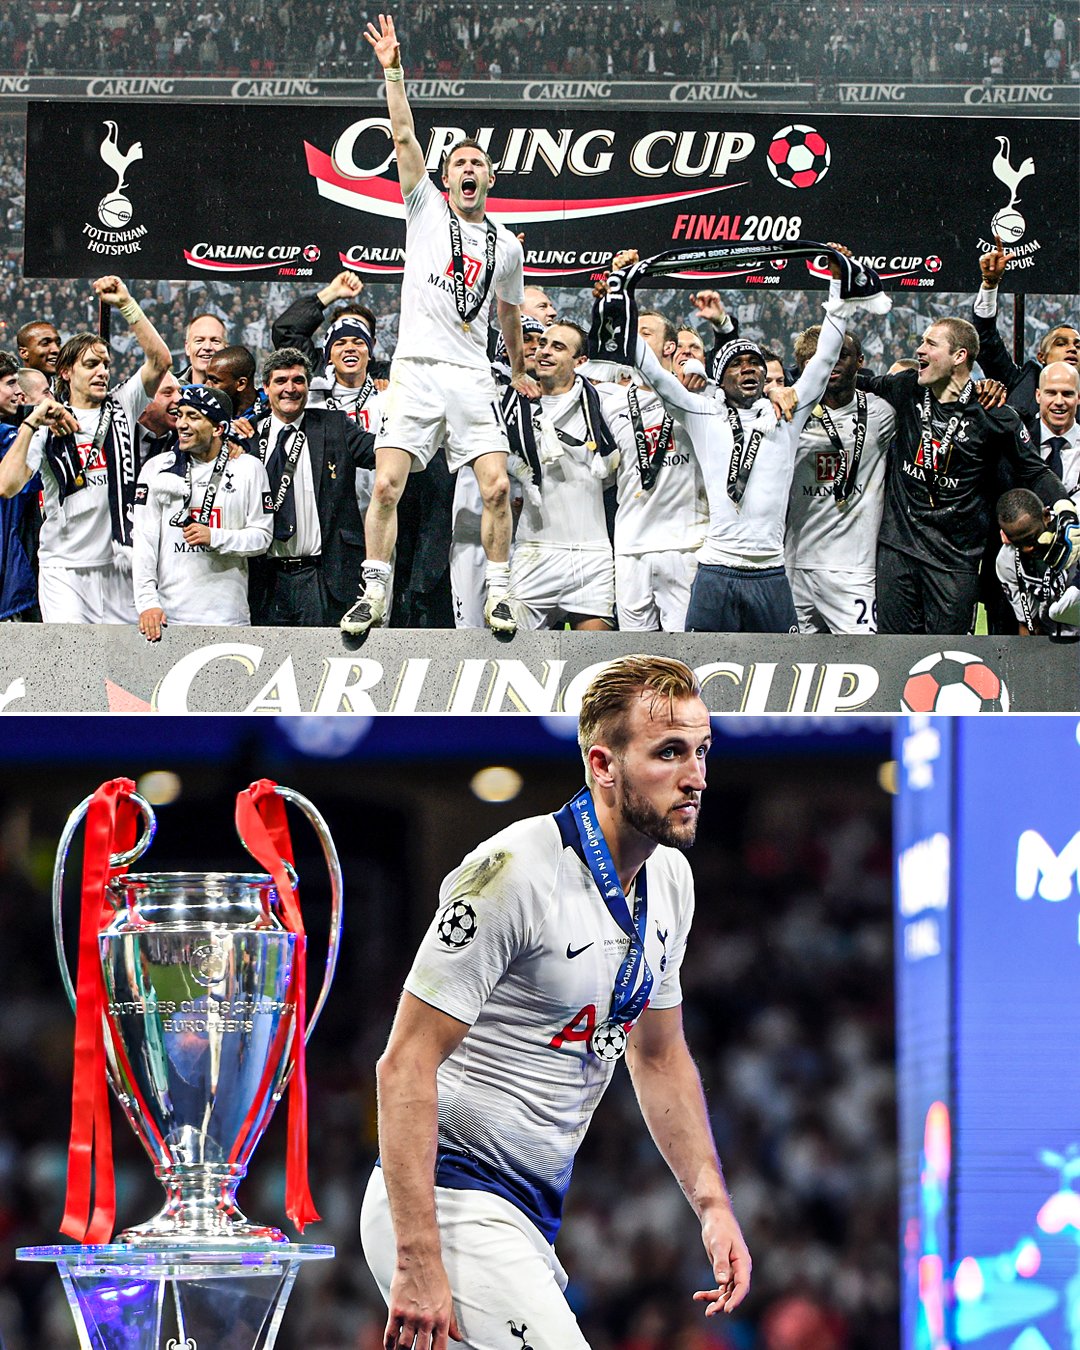 How many trophies has Tottenham Hotspur won? When was the last